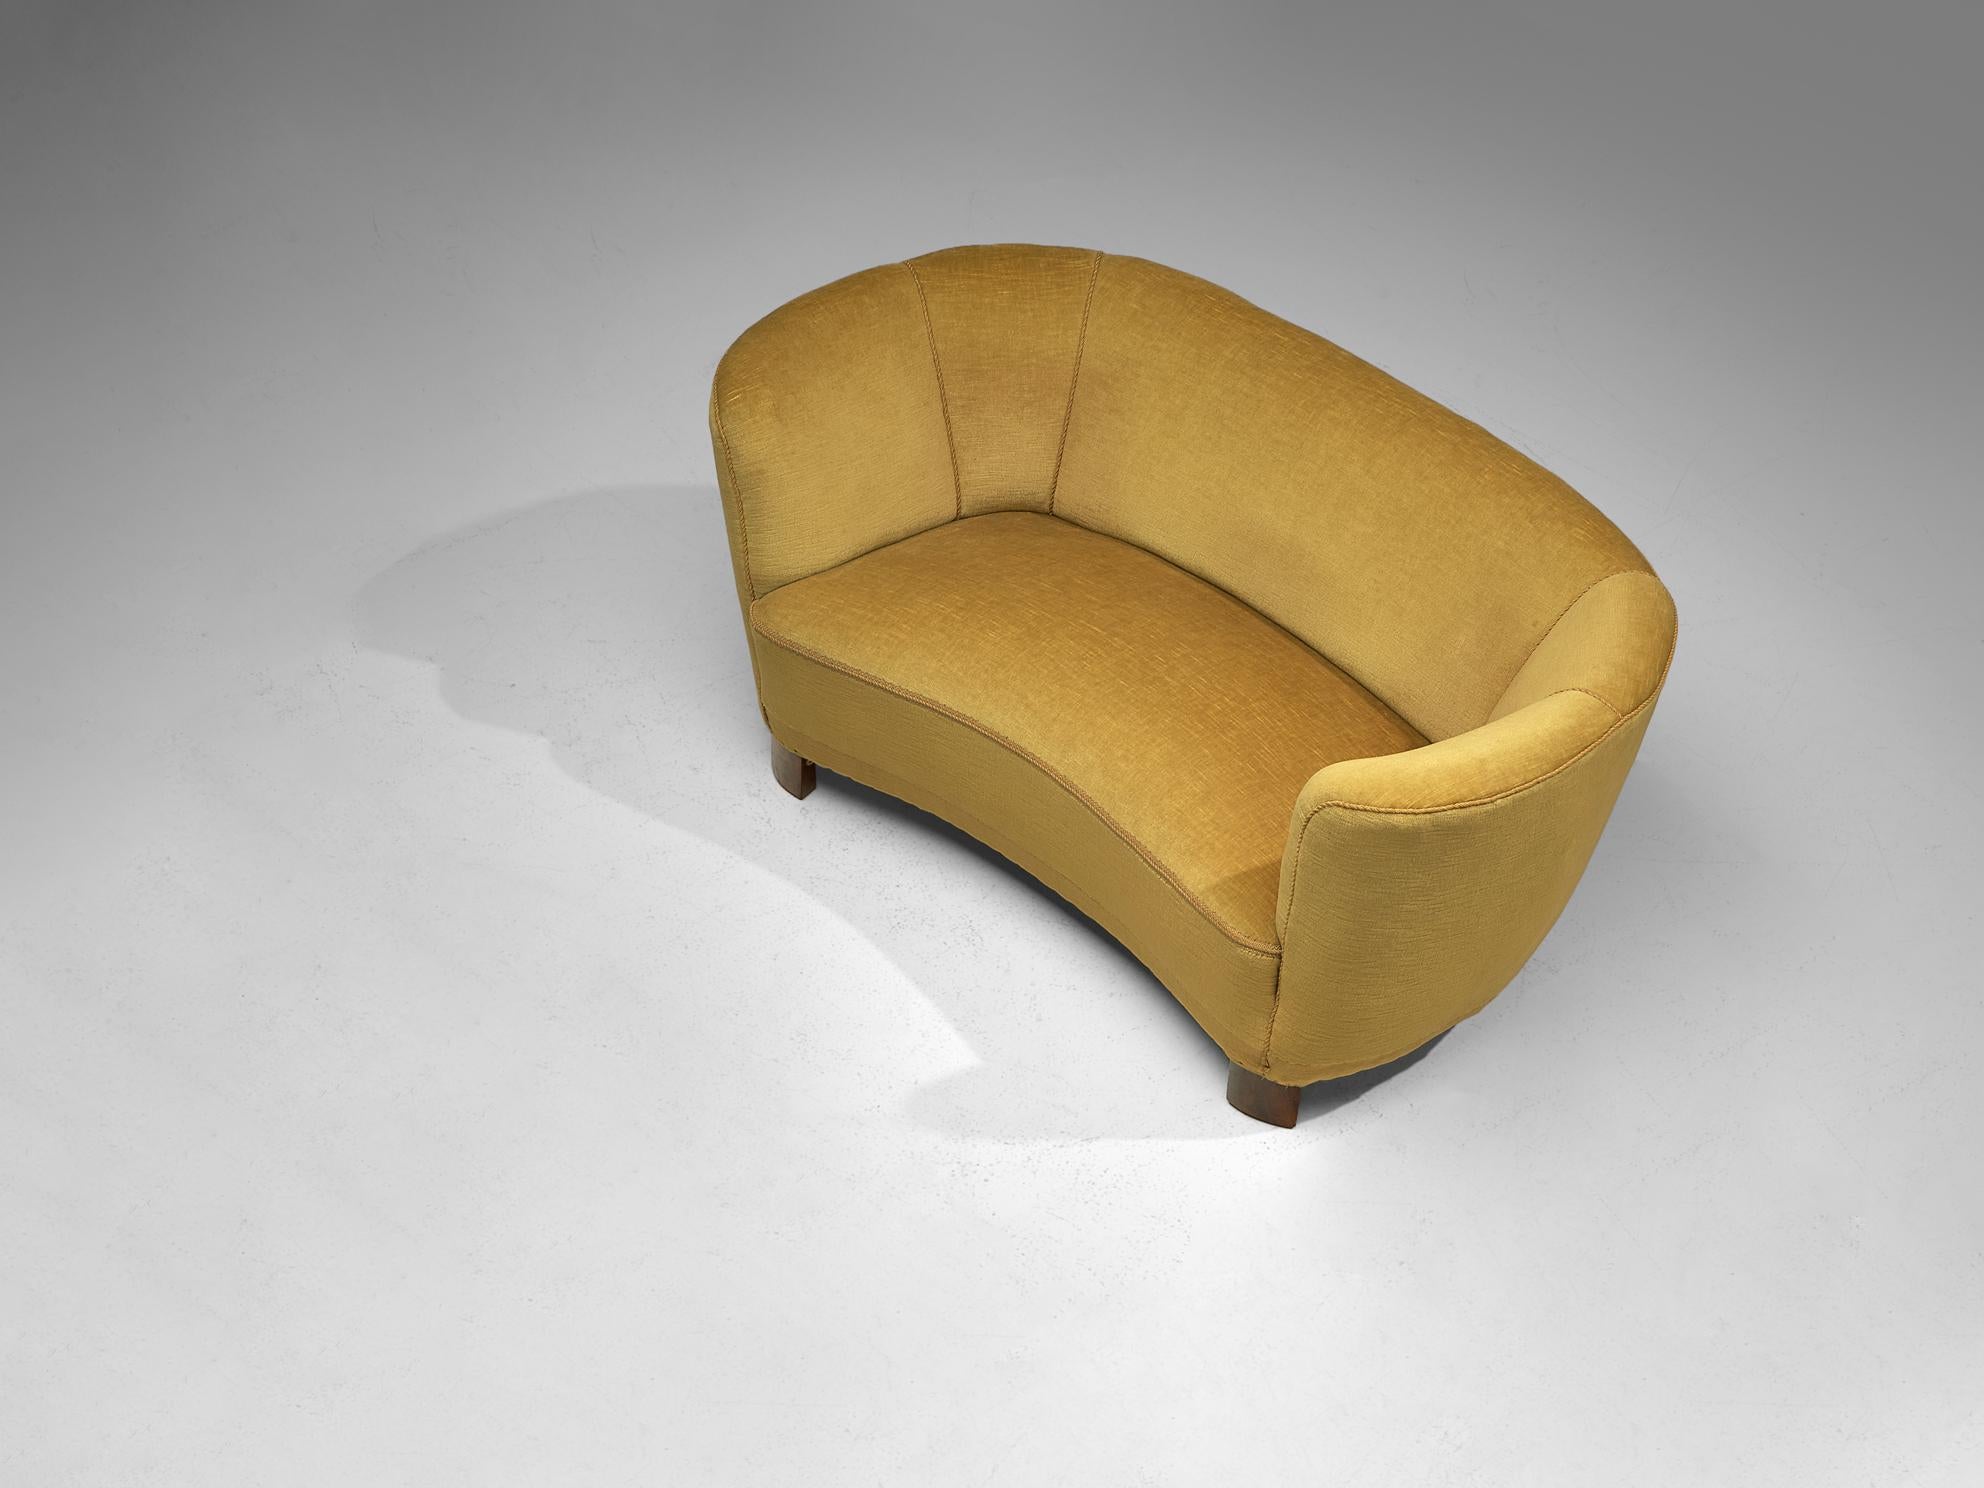 Sofa, velvet, wood, Denmark, 1940s

This voluptuous sofa is based on a solid construction of round shapes and curvaceous lines. The seating area and the backrest are organically shaped and together with the absence of strict angles, the sofa attains